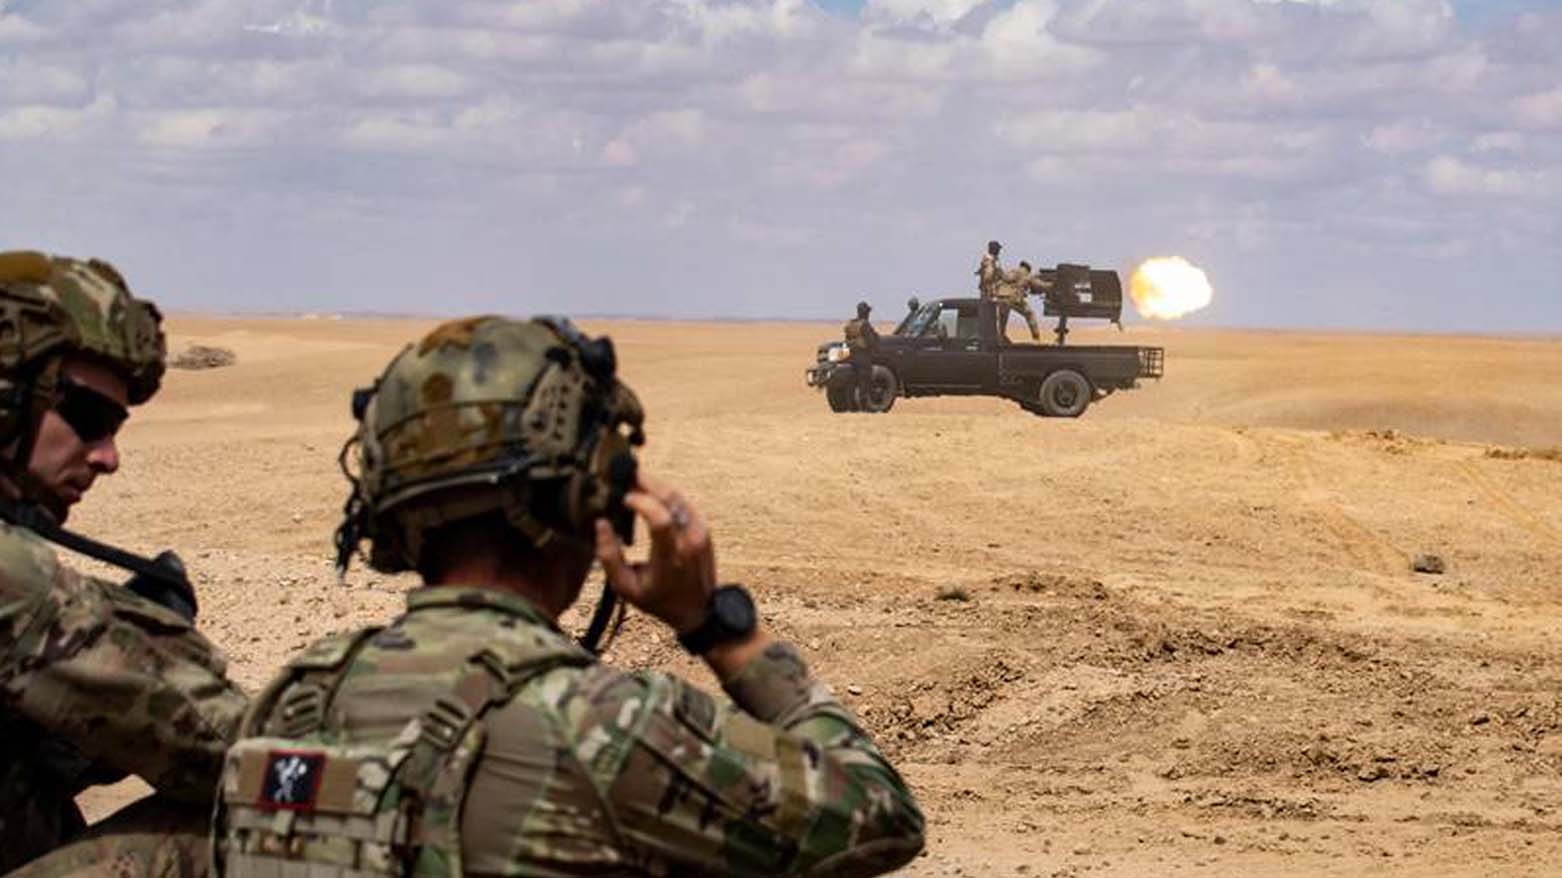 SDF and the US-led coalition troops practise using heavy weapons in north-eastern Syria, where fears are mounting of further attacks by Turkey. (Photo: AFP)